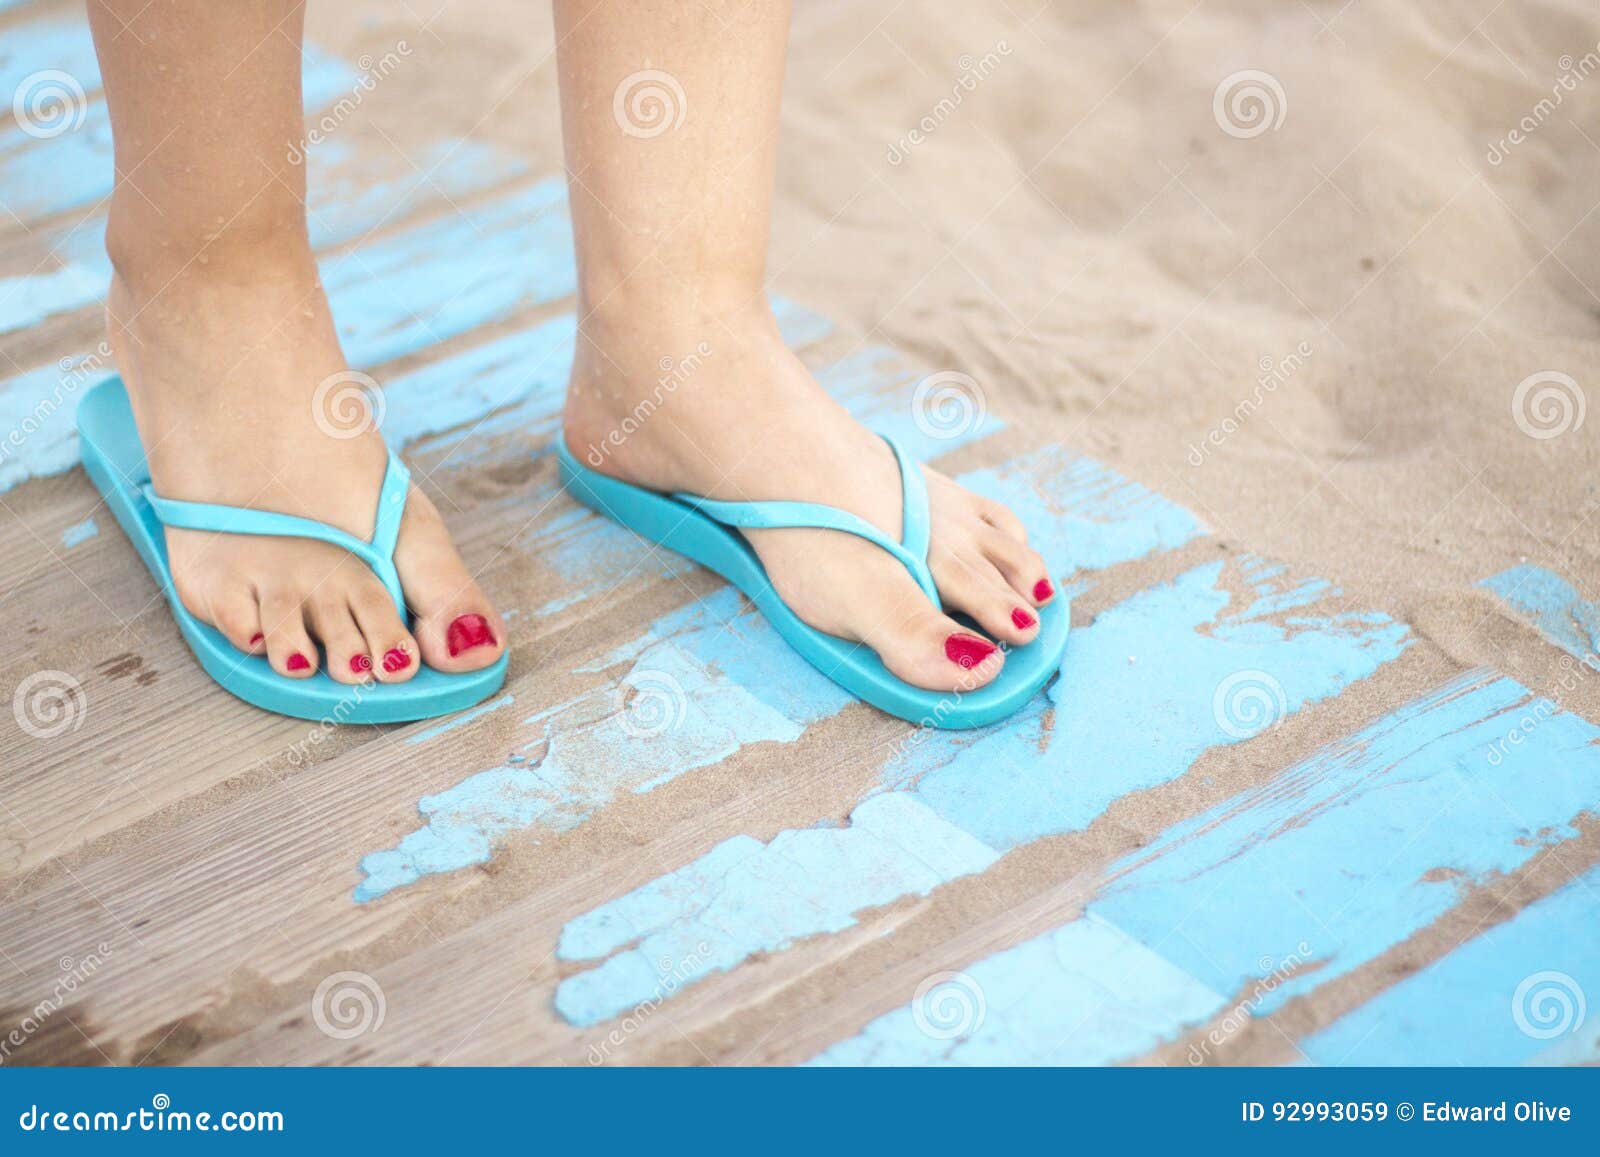 Lady& X27;s Feet in Sandals on Beach Stock Image - Image of person ...